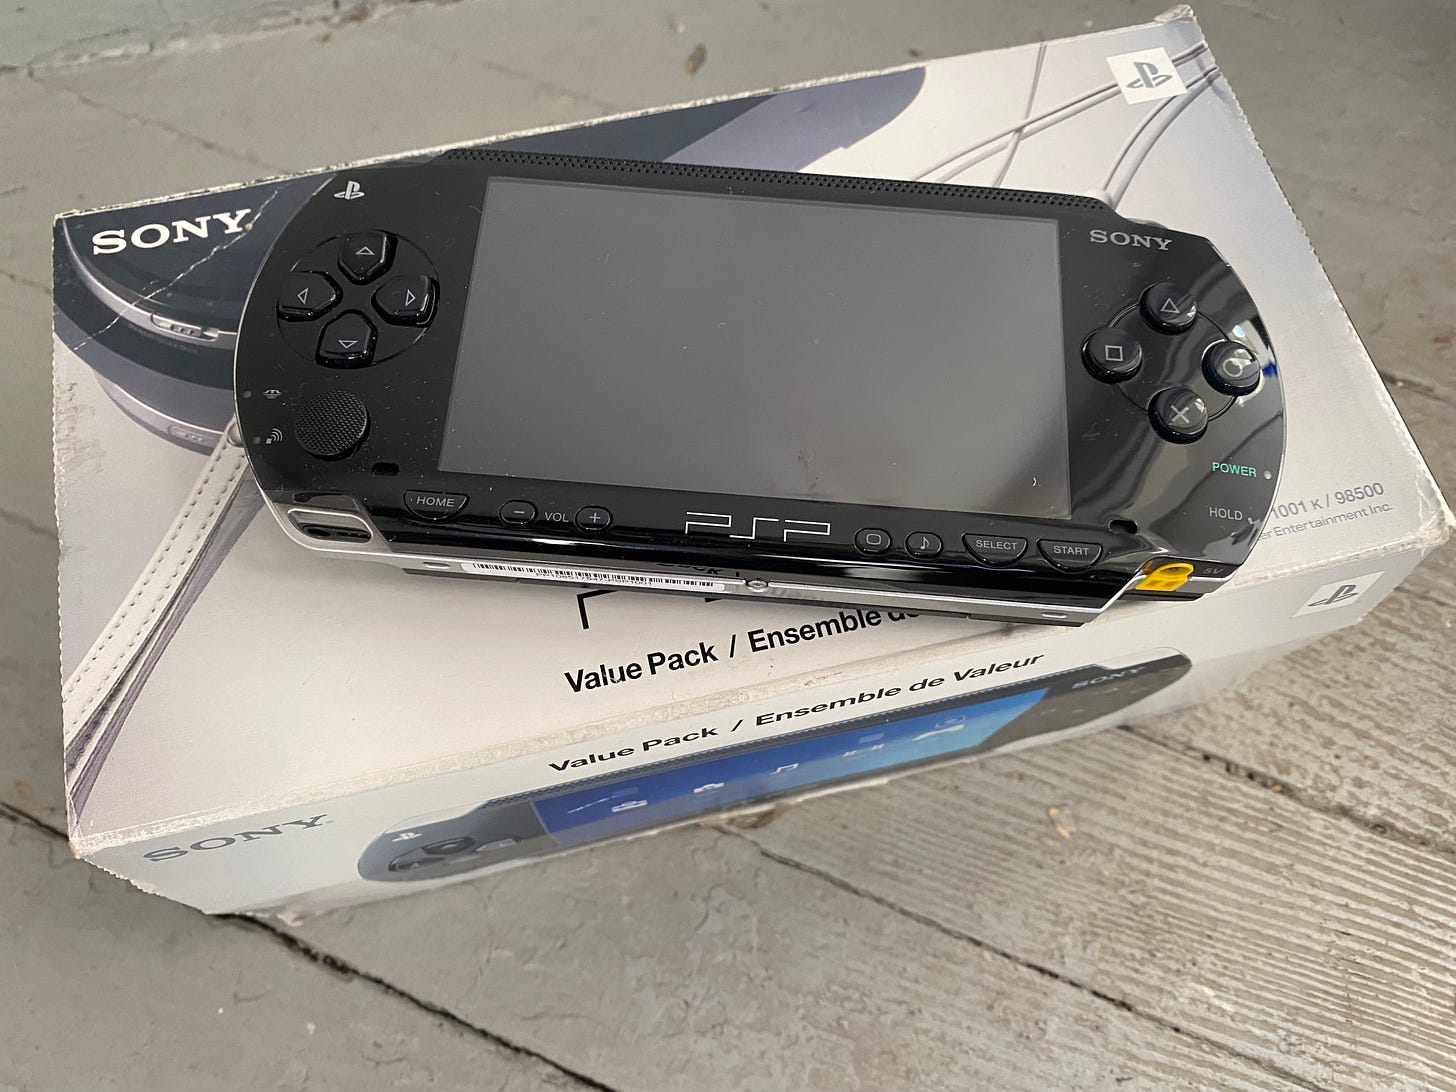 Photo of a PlayStation Portable resting on the box it came in